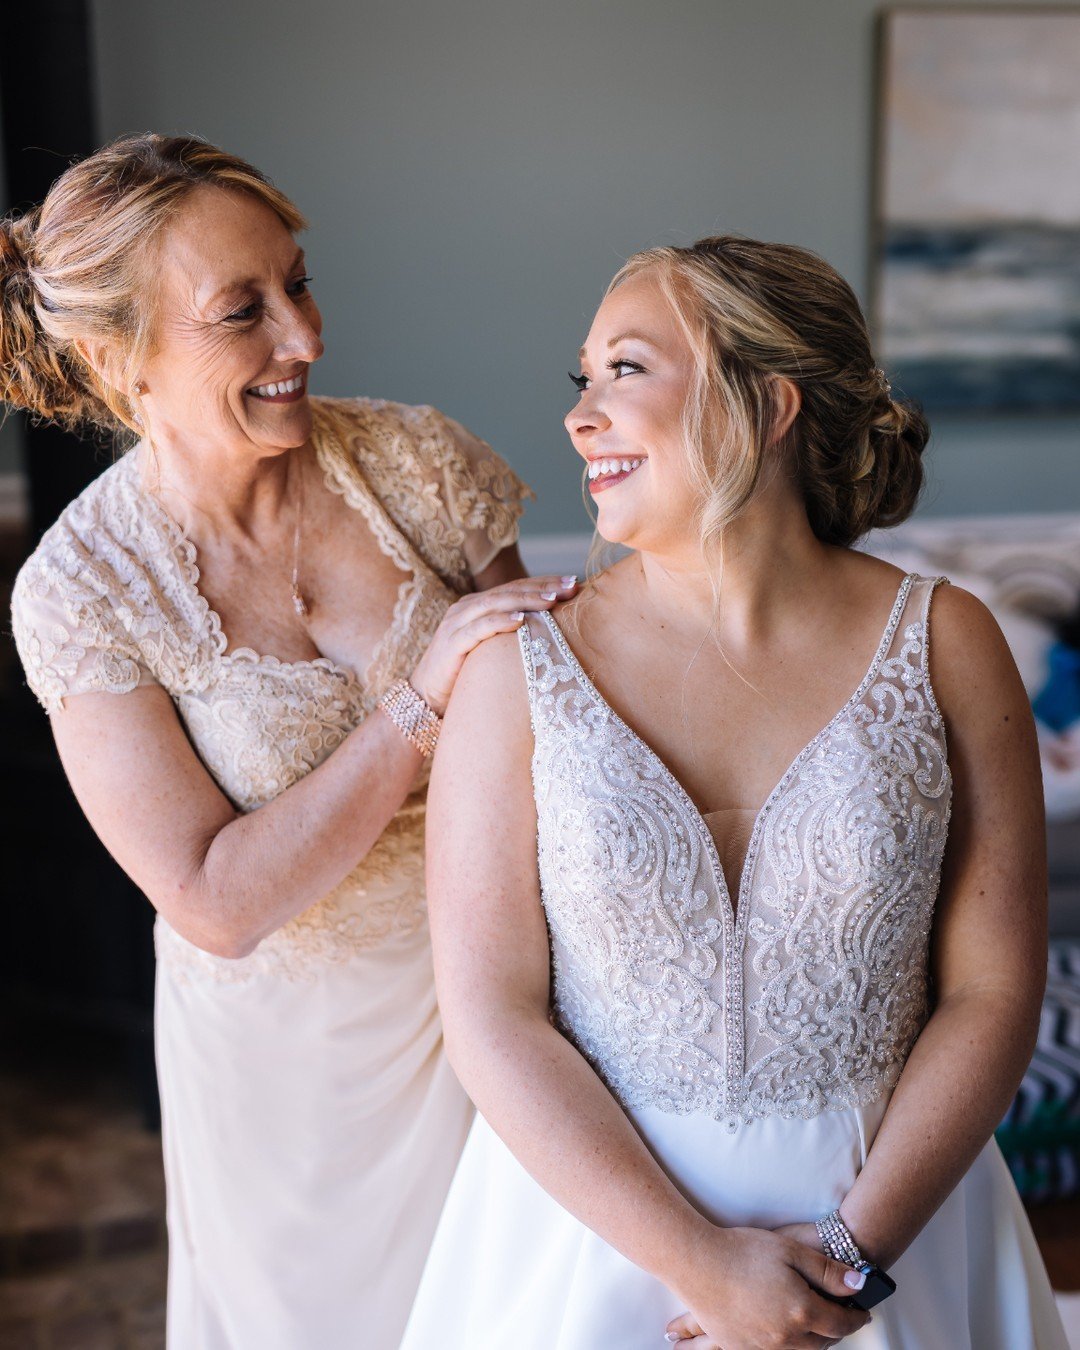 Happy Mother&rsquo;s Day! As a wedding venue, we have the pleasure of meeting so many ❤️MOMS! If you&rsquo;ve gotten married at our property, share a 📸photo of your Mother of the Bride and Mother of the Groom pics to ☀️brighten our timeline this Sun